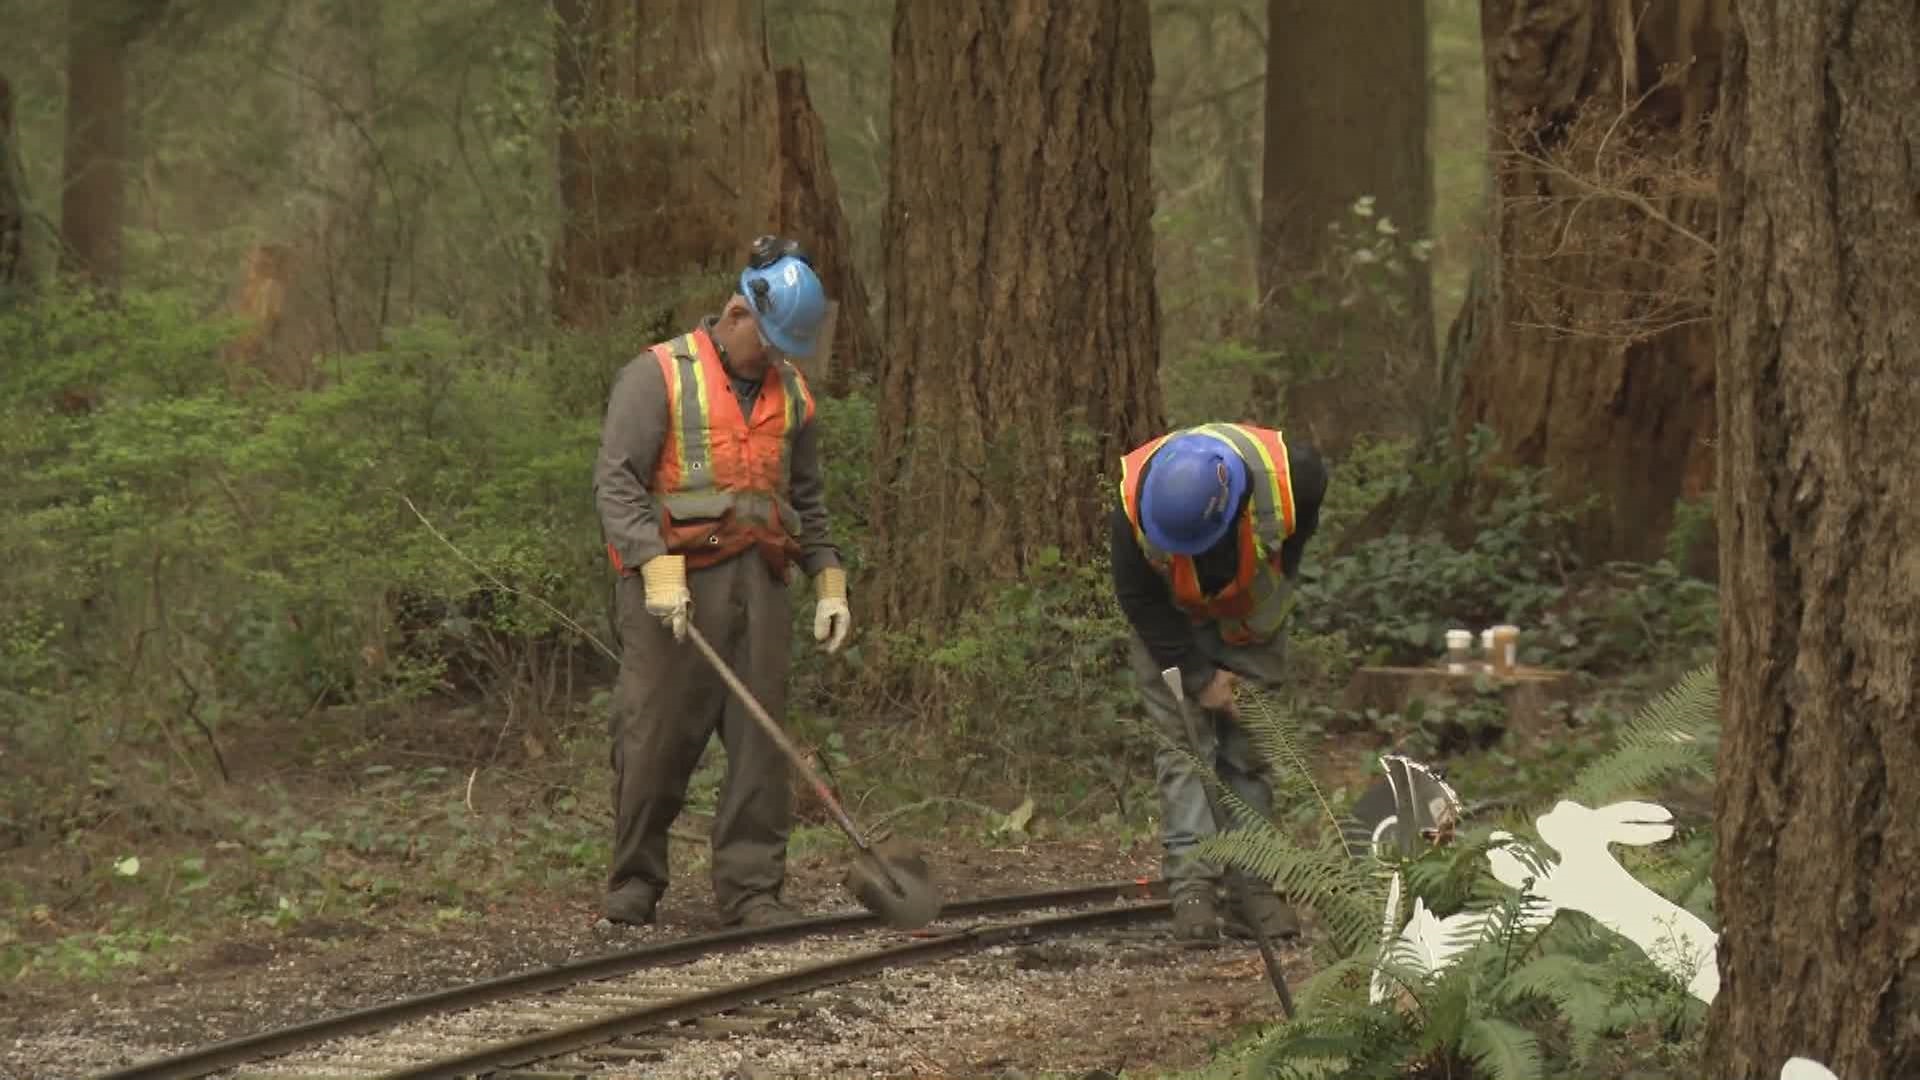 Stanley Park Easter train halted due to track damage